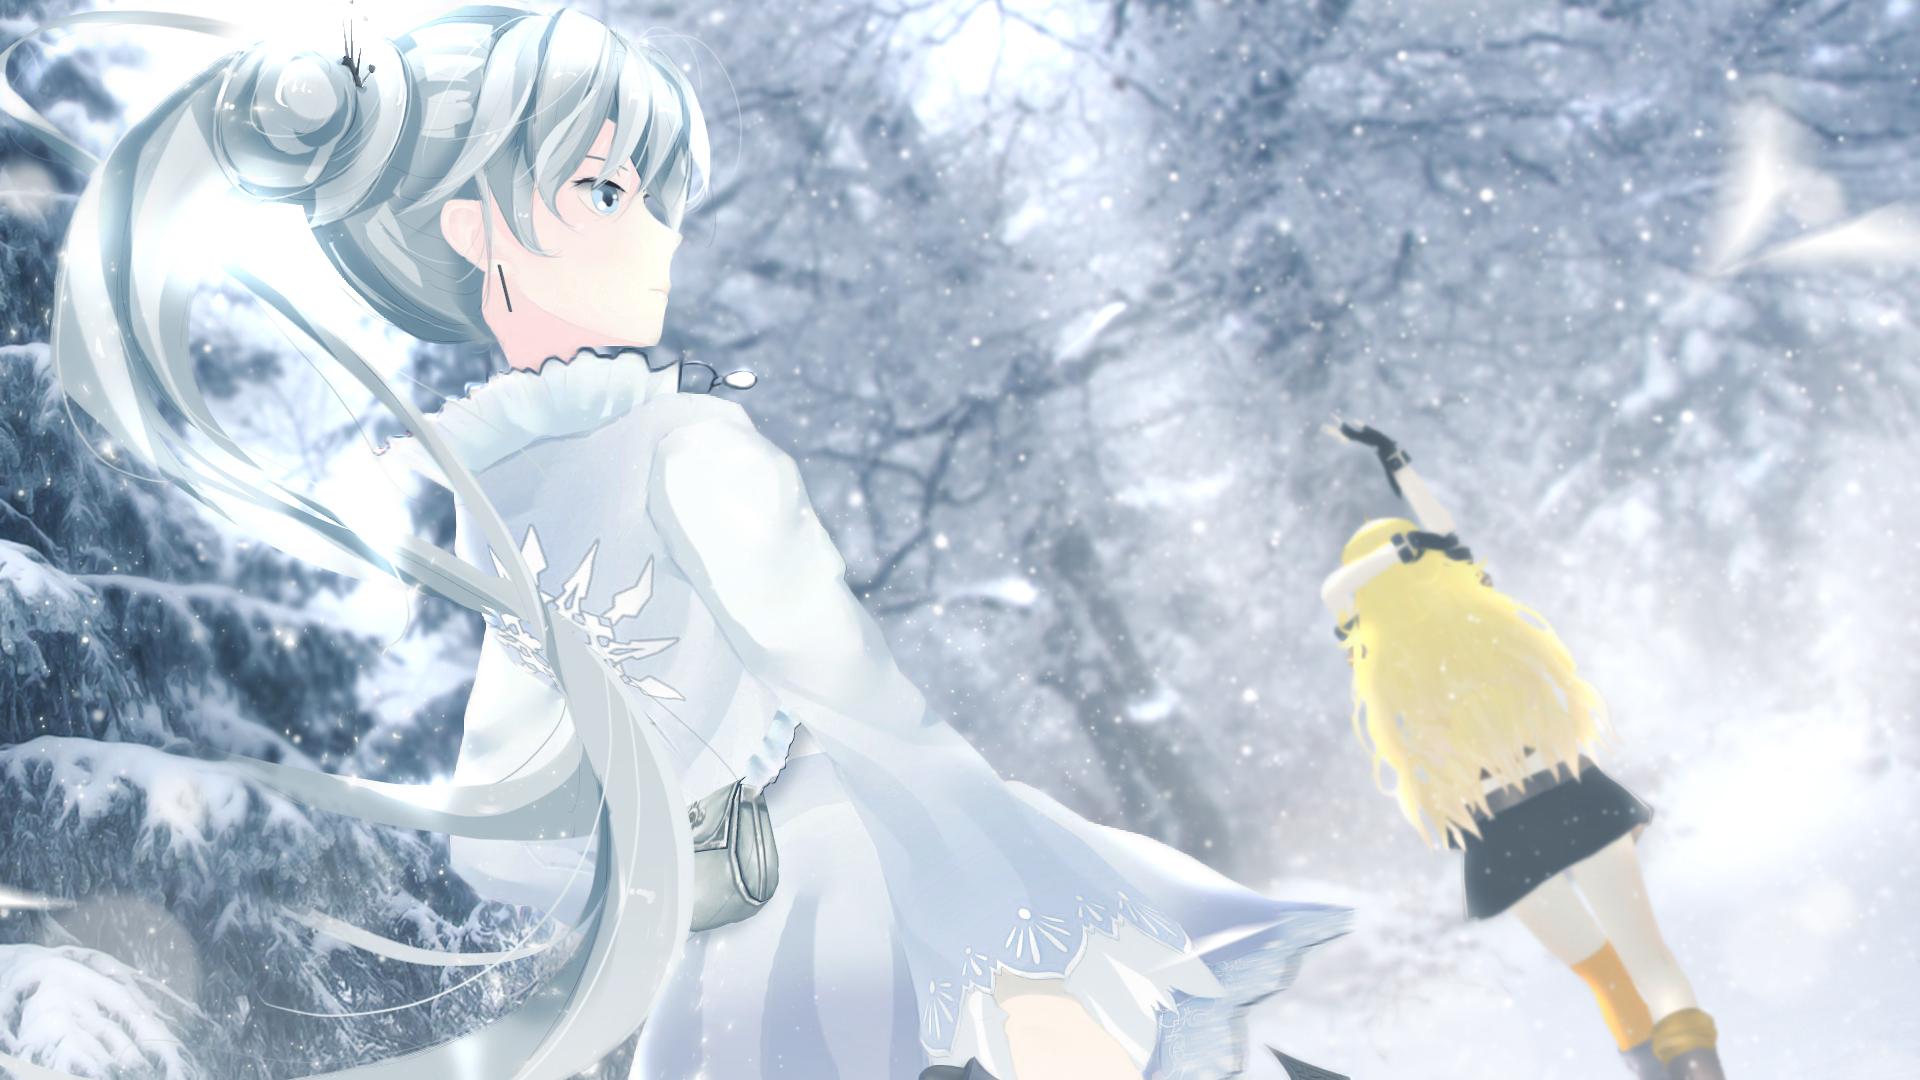 A Gorgeous View with Weiss Schnee [sculp2]